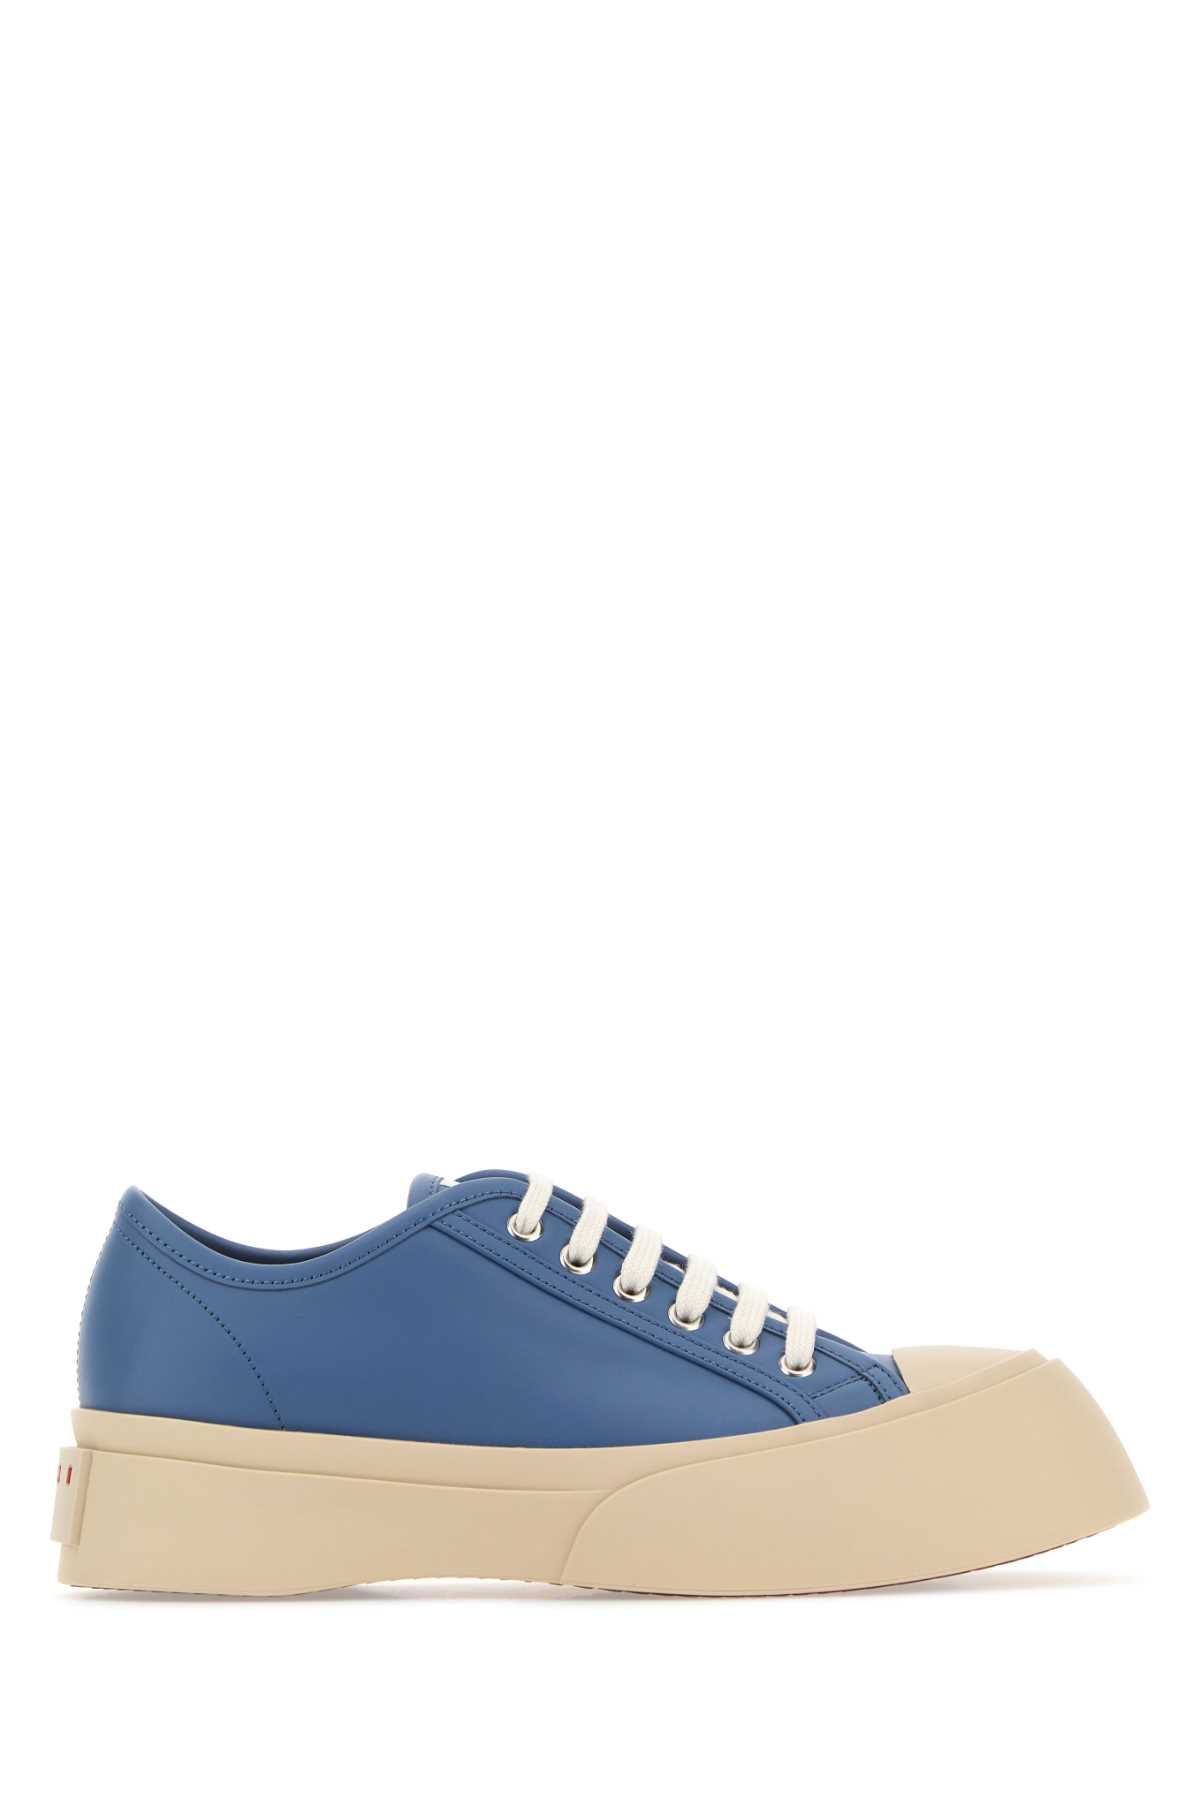 Cerulean Blue Leather Pablo Sneakers